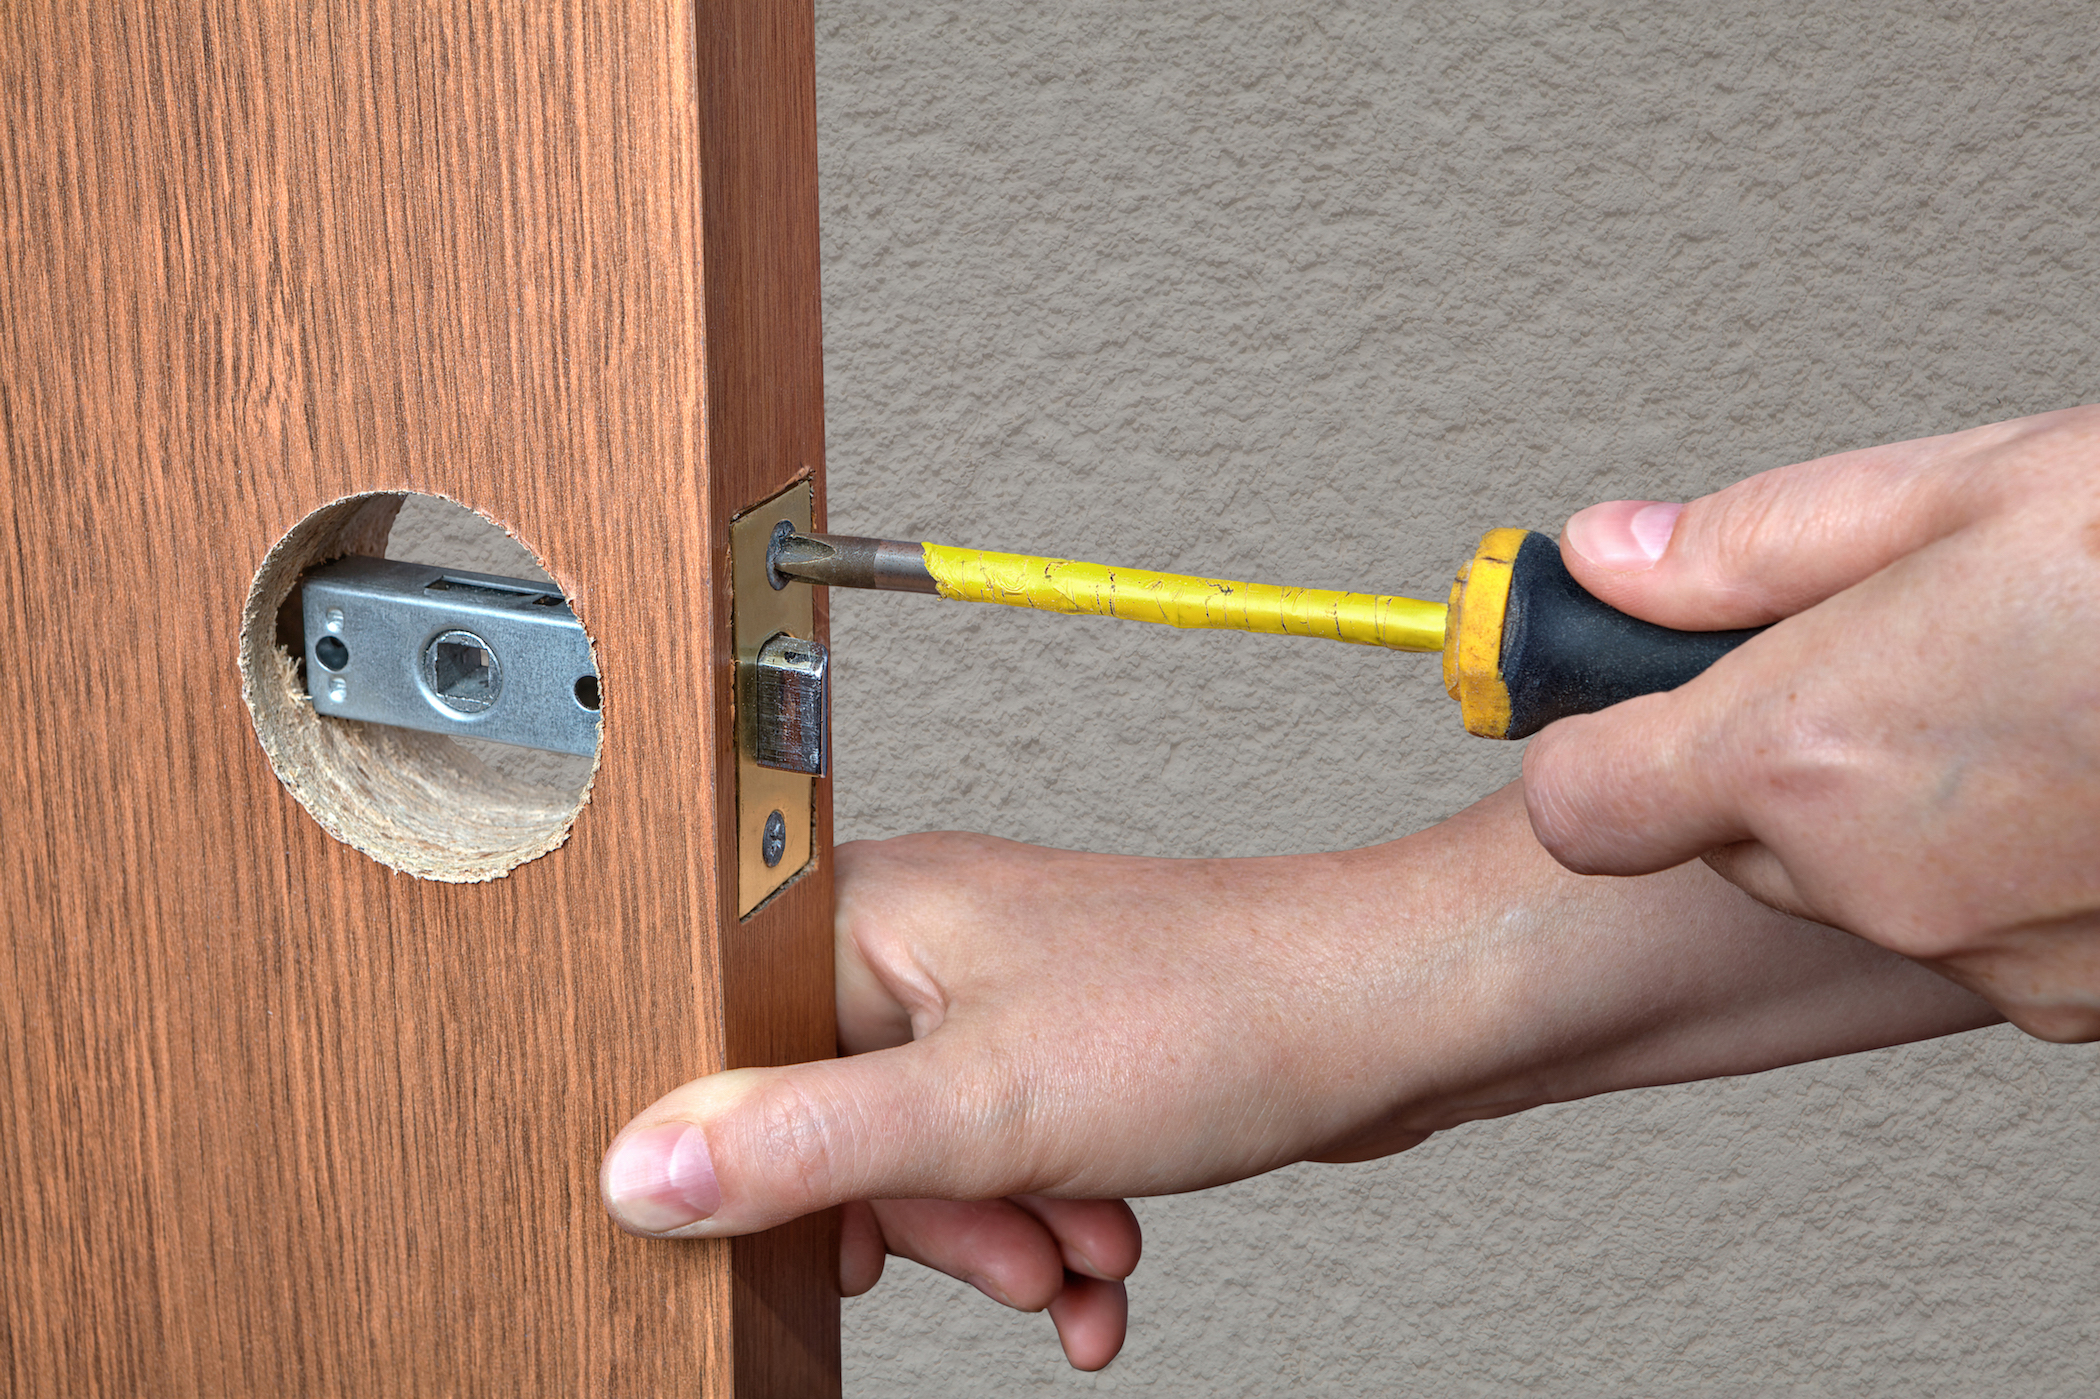 Residential Lock Replacement Locksmith Tampa Security Lock Systems Call 813-874-1608